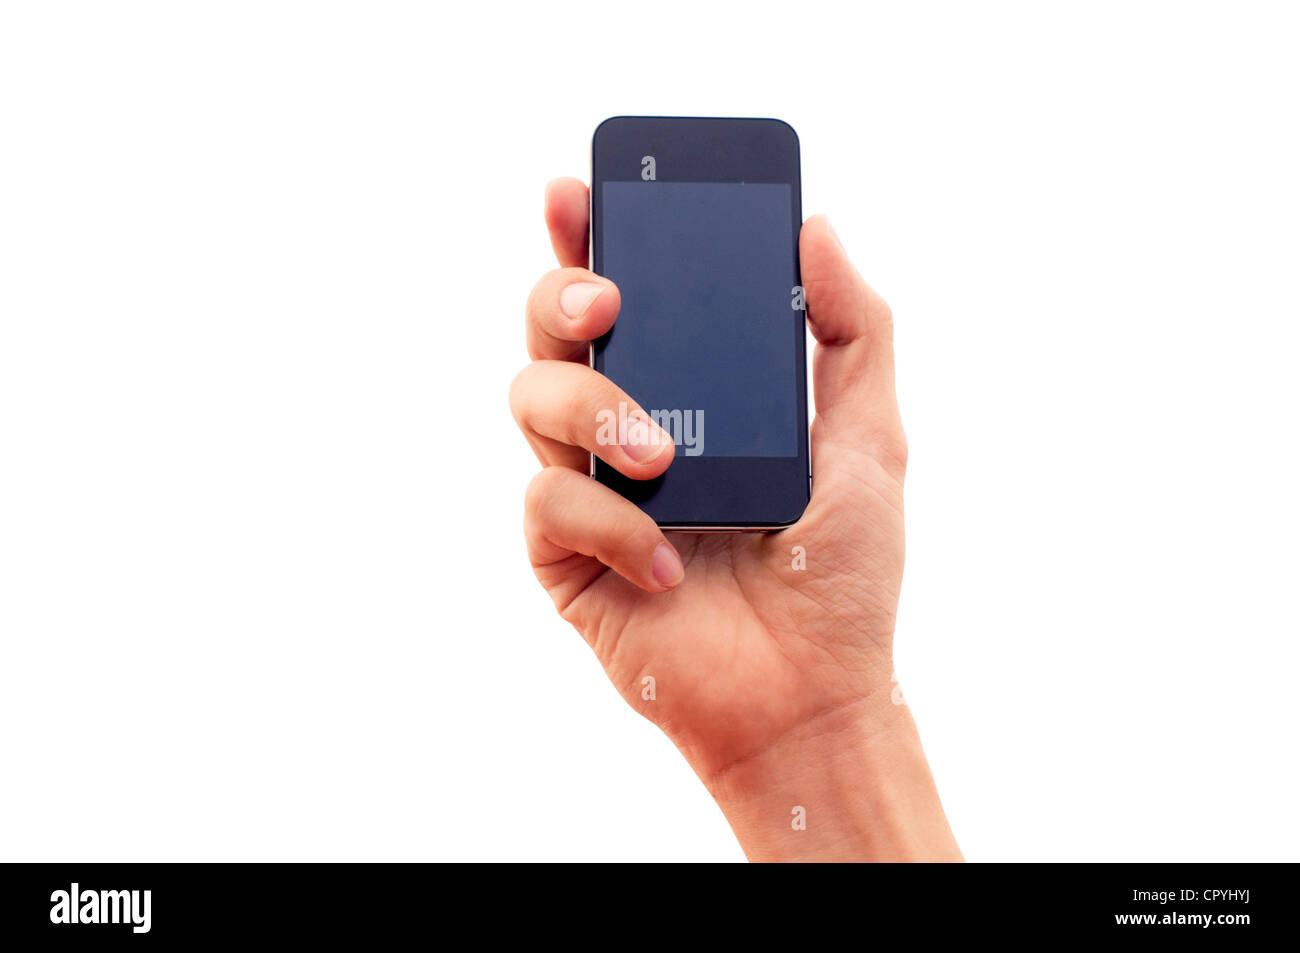 isolated hand holding smartphone or phone, with clipping path in jpg. Stock Photo